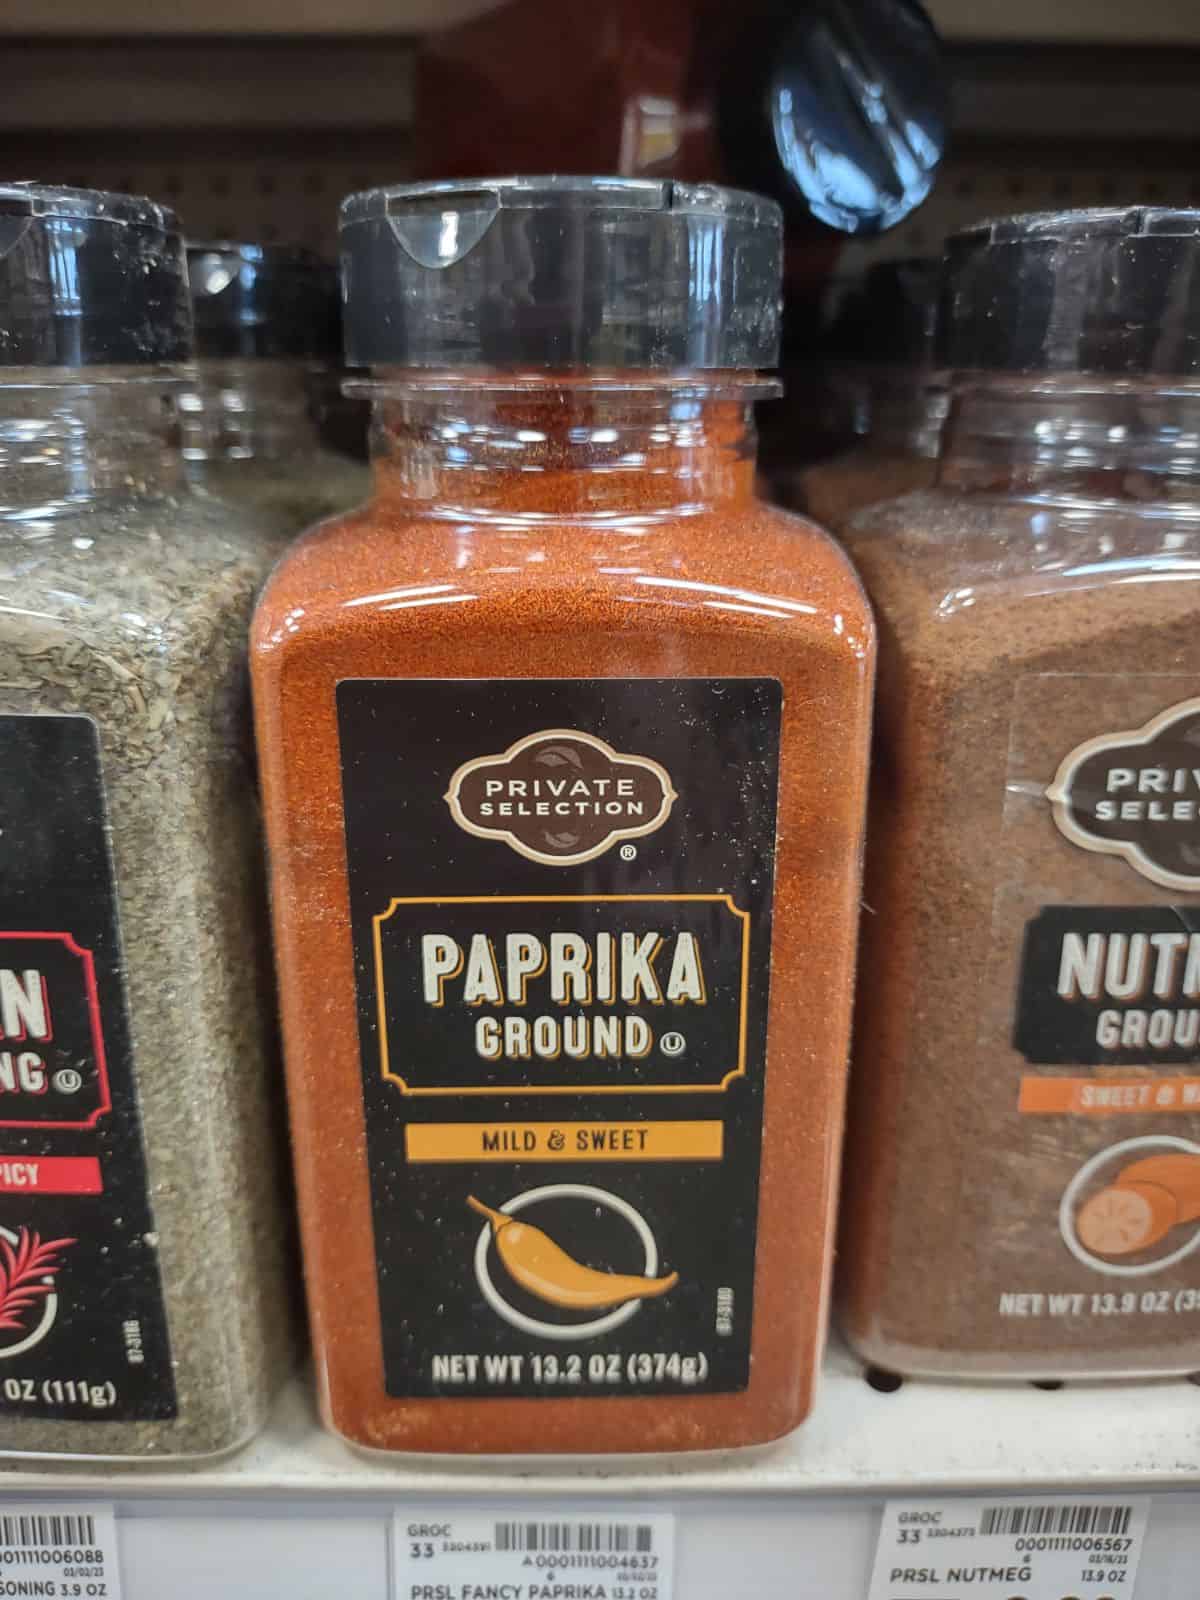 A container of Private Selection Ground Paprika at the store.